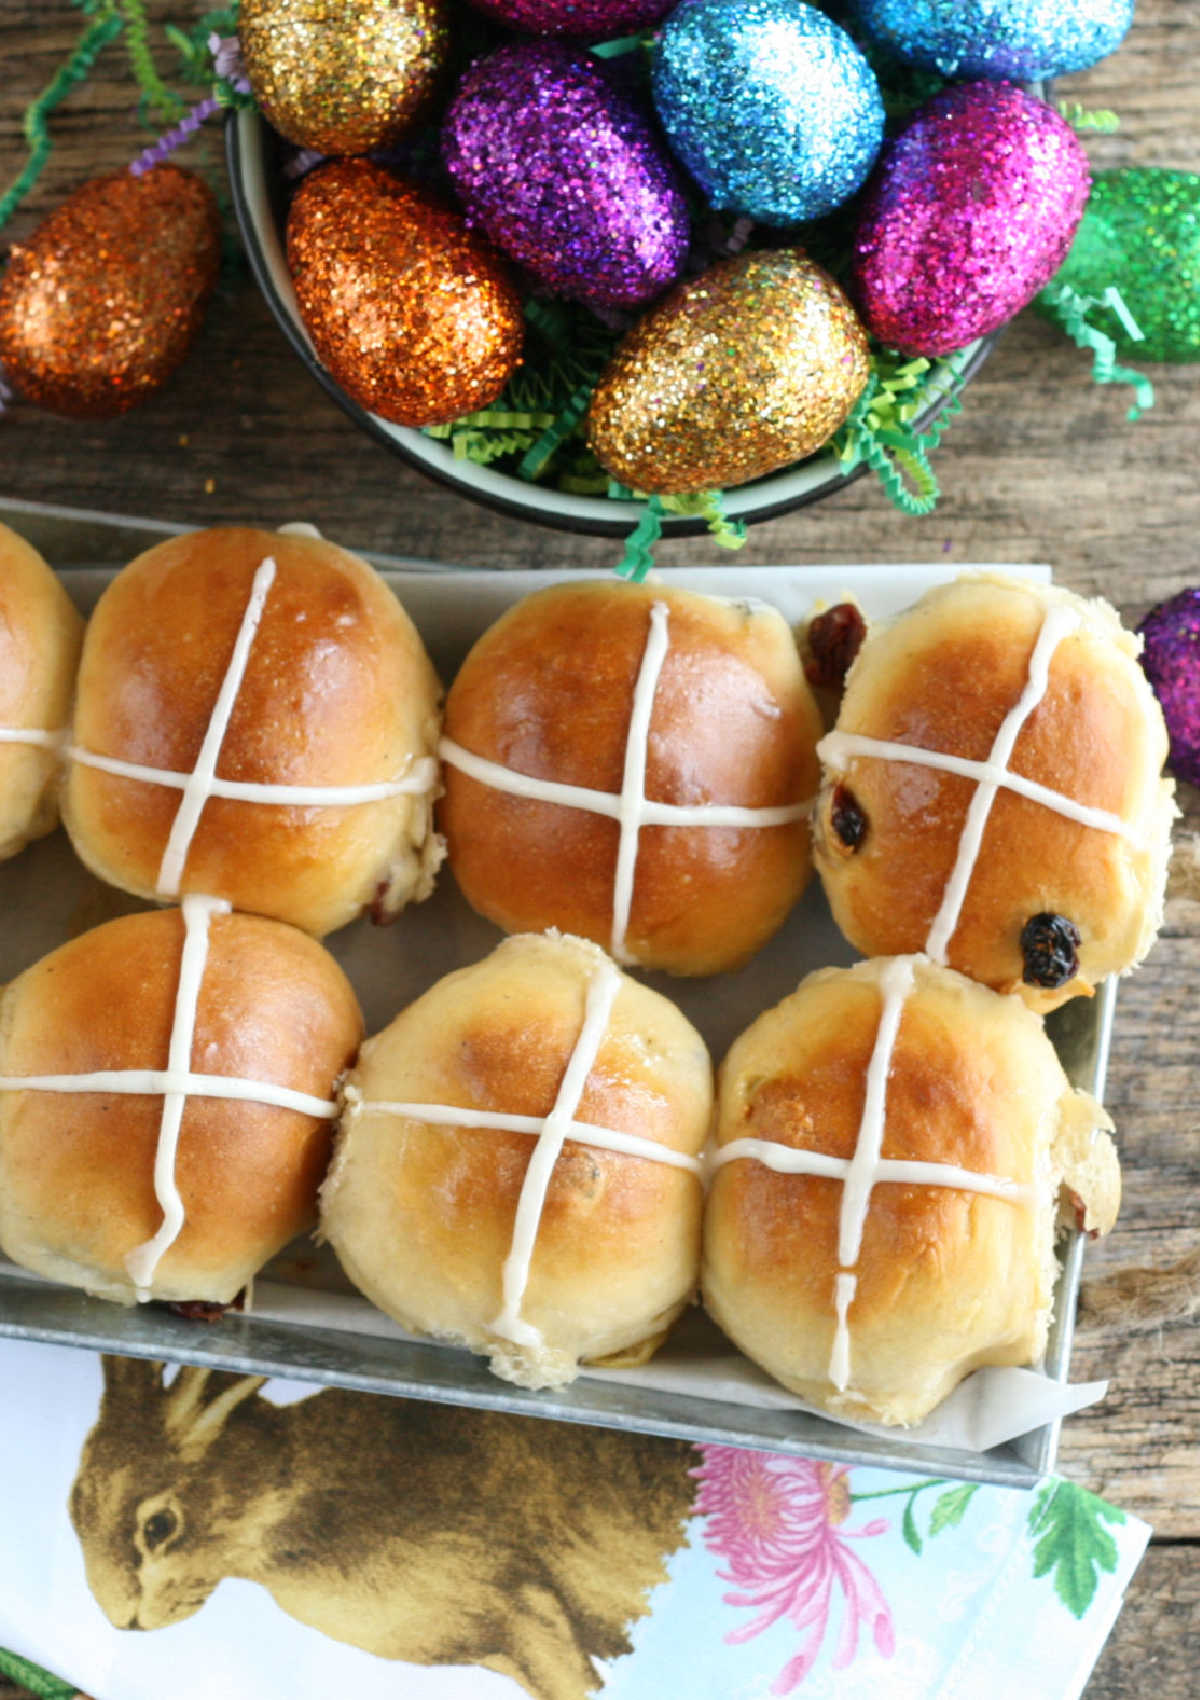 Hot cross buns with icing crosses, cranberries, colorful glittered eggs in background.